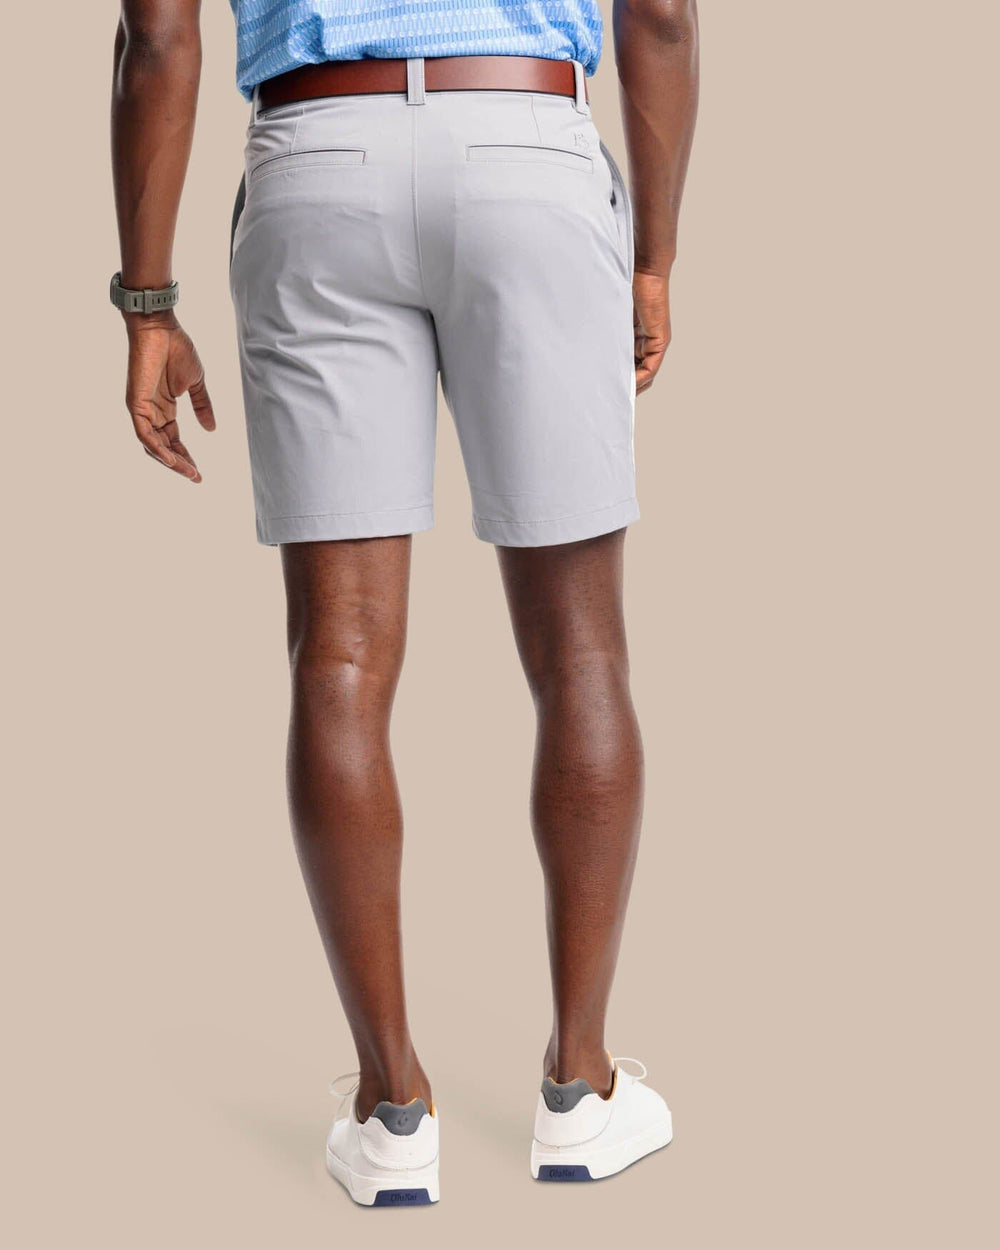 The back view of the Southern Tide brrr die performance short 1 by Southern Tide - Steel Grey